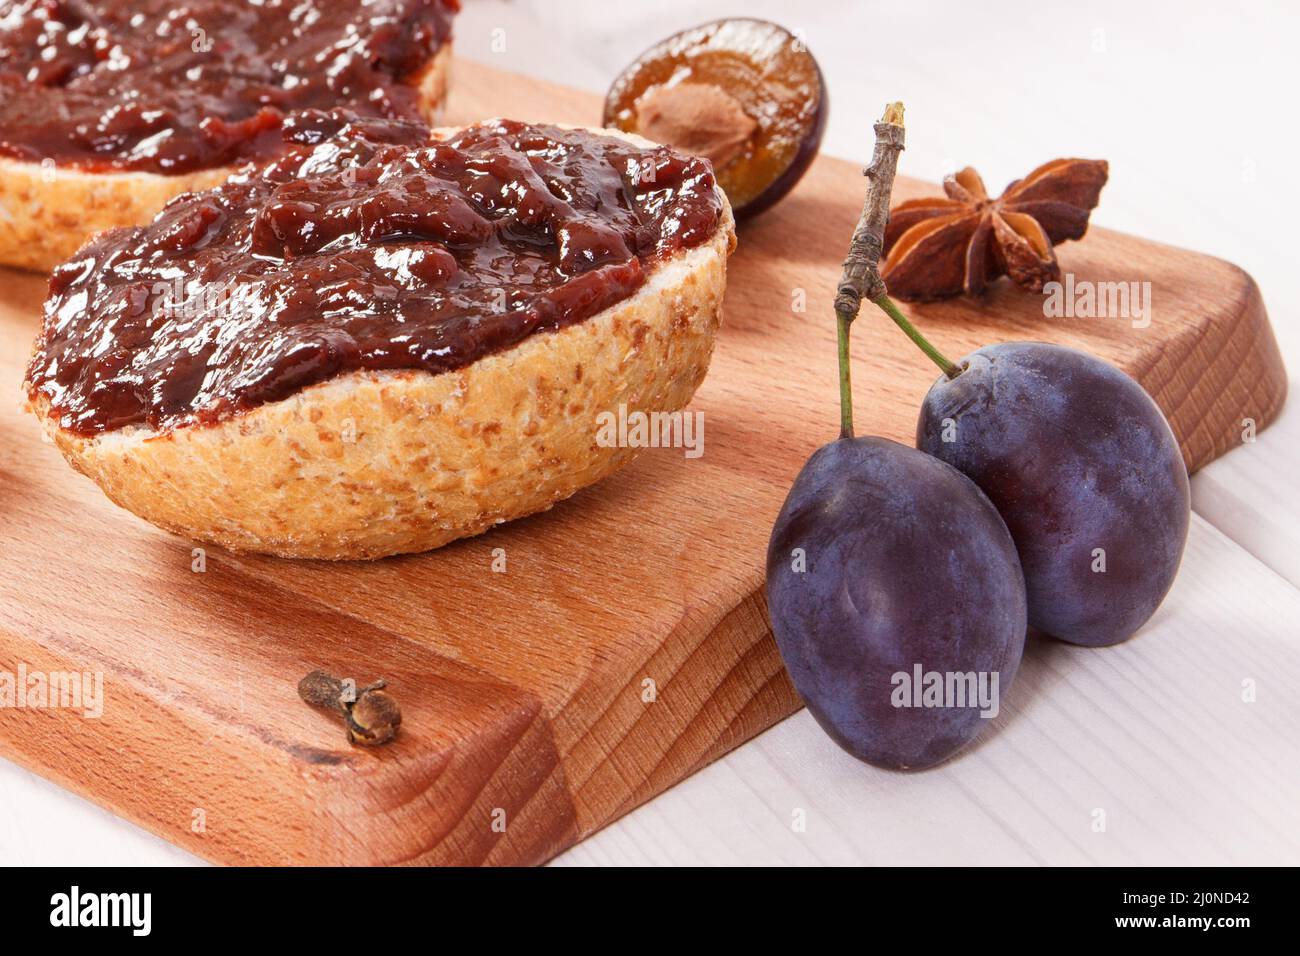 Sandwiches with plum marmalade or jam on wooden cutting board, concept of delicious breakfast Stock Photo